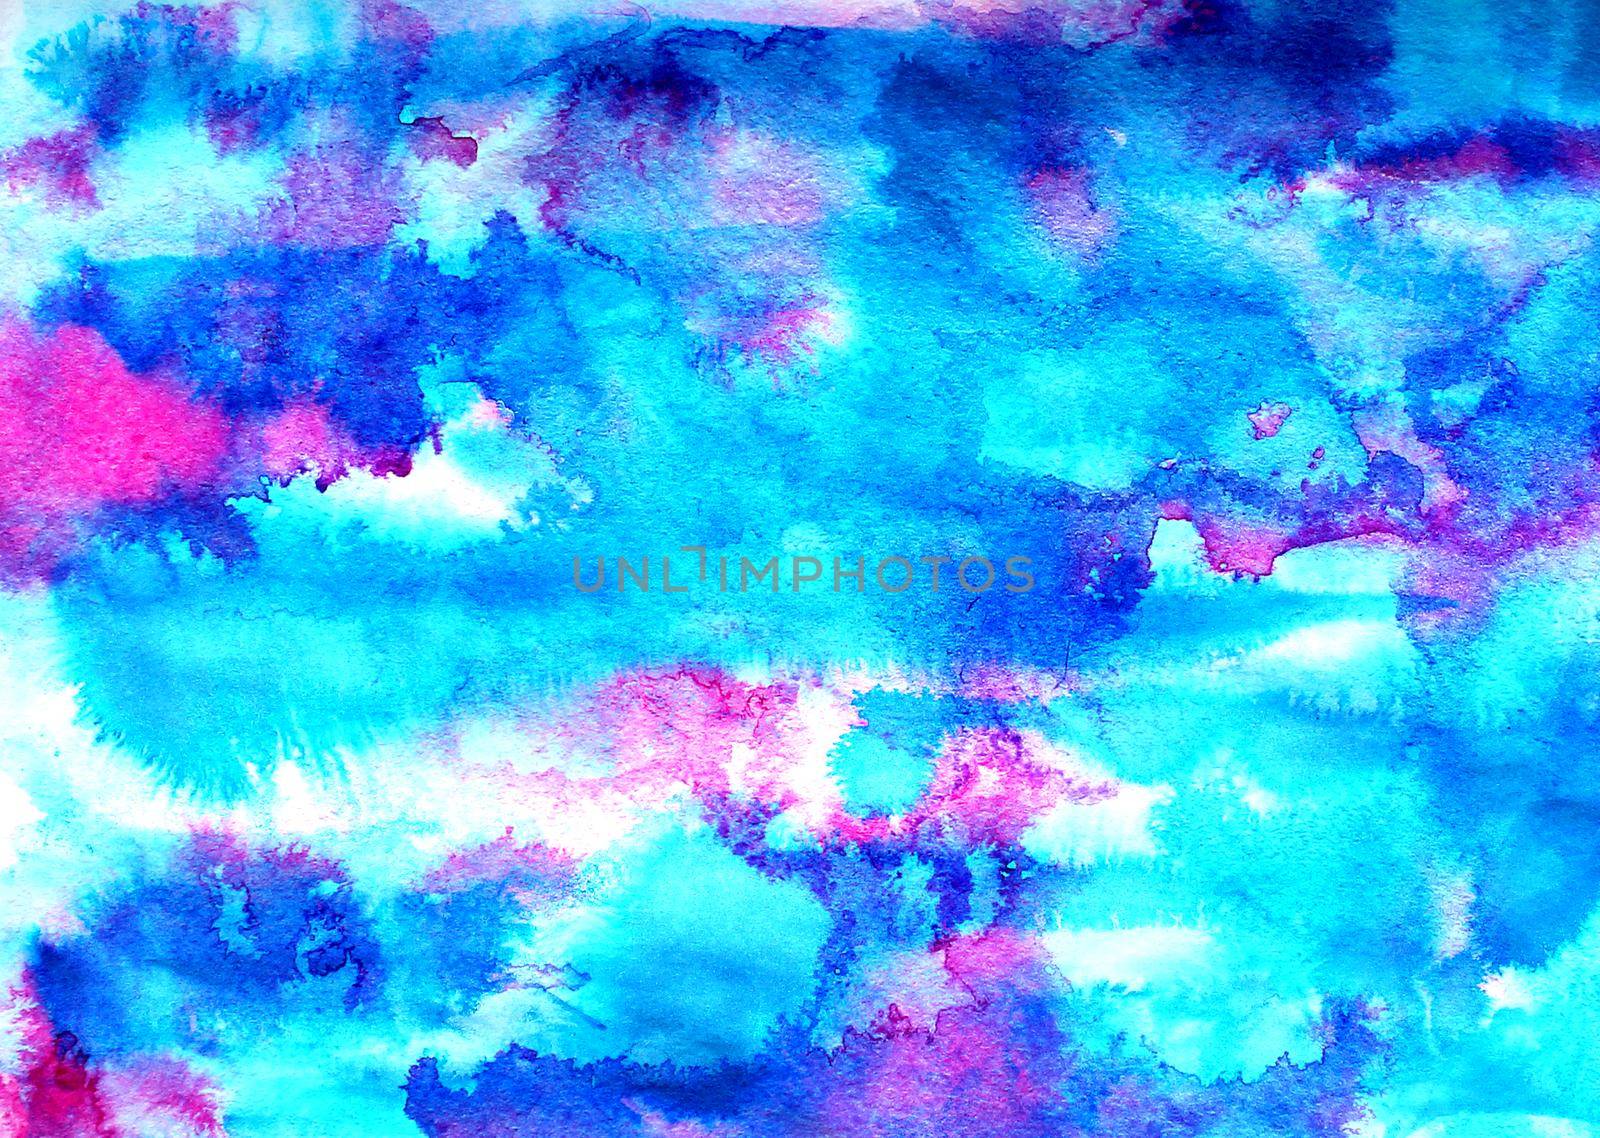 Abstract blue pink ink painting on grunge paper texture. Hand painted watercolor background. wash. Illustration stain and spot. Bright color. Unusual creativity art. Pattern